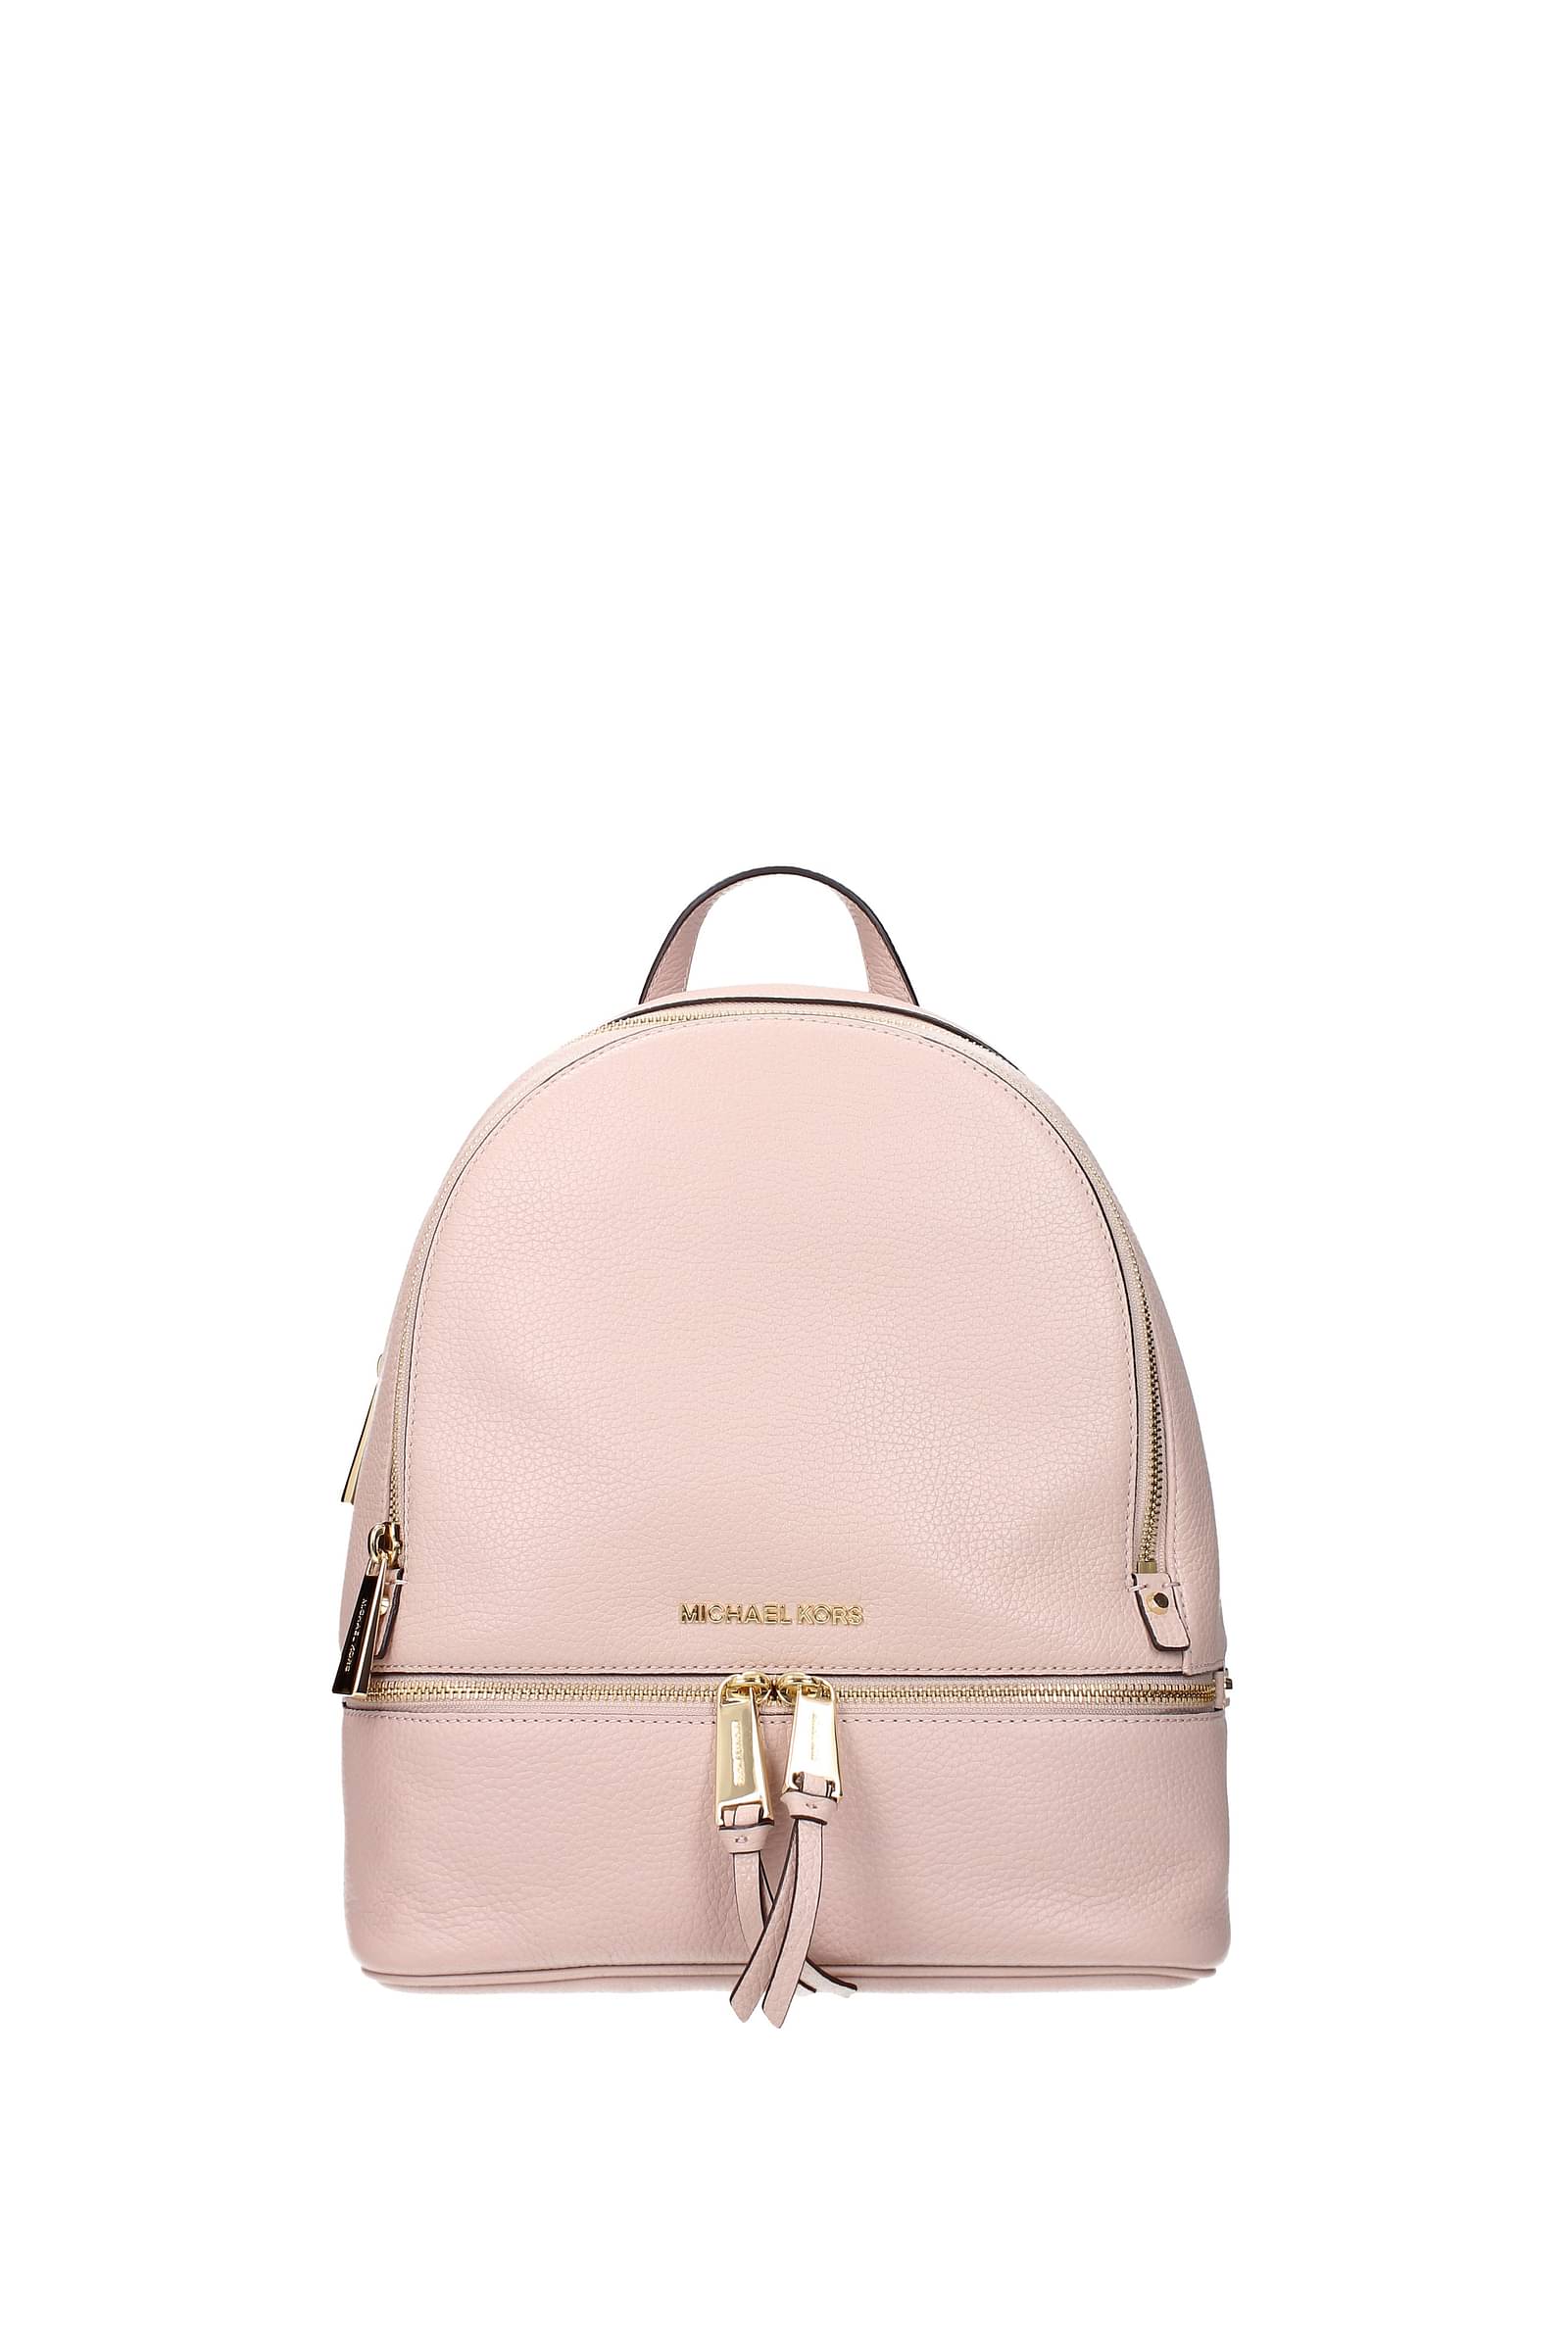 11 Best Kate Spade and Michael Kors Backpack Purses for Women